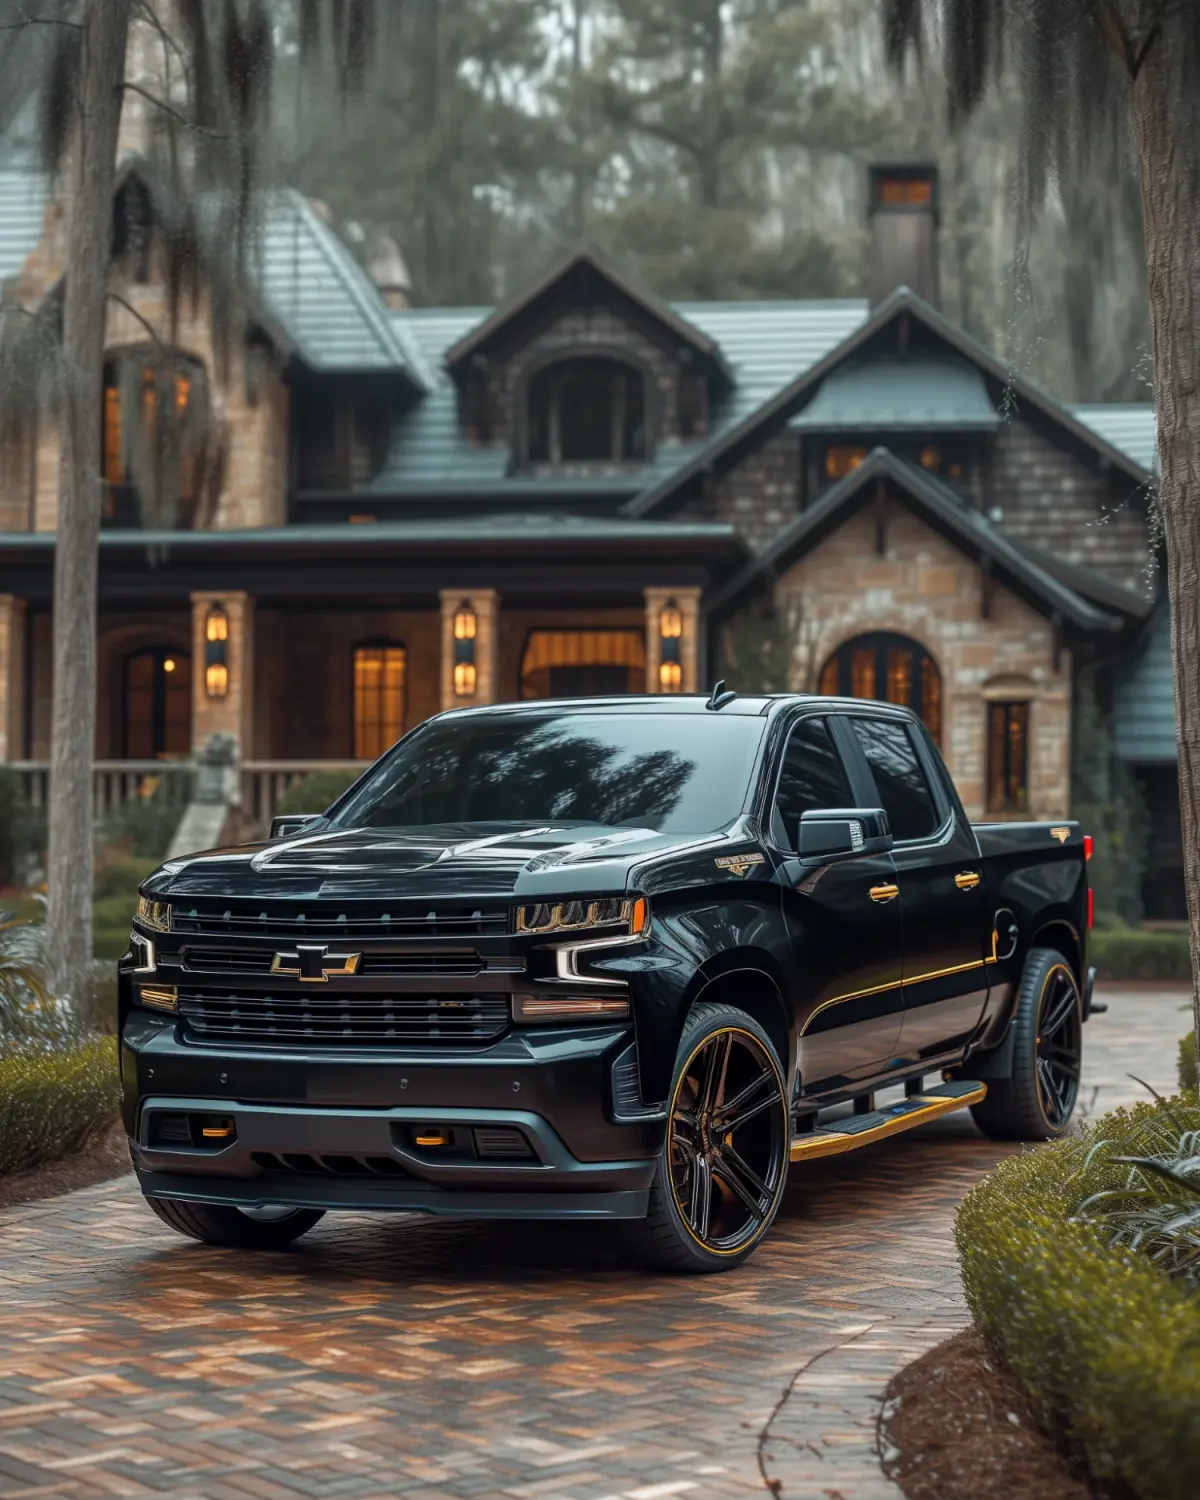 Luxurious Chevrolet Silverado with high-end interior upgrades in an elegant setting